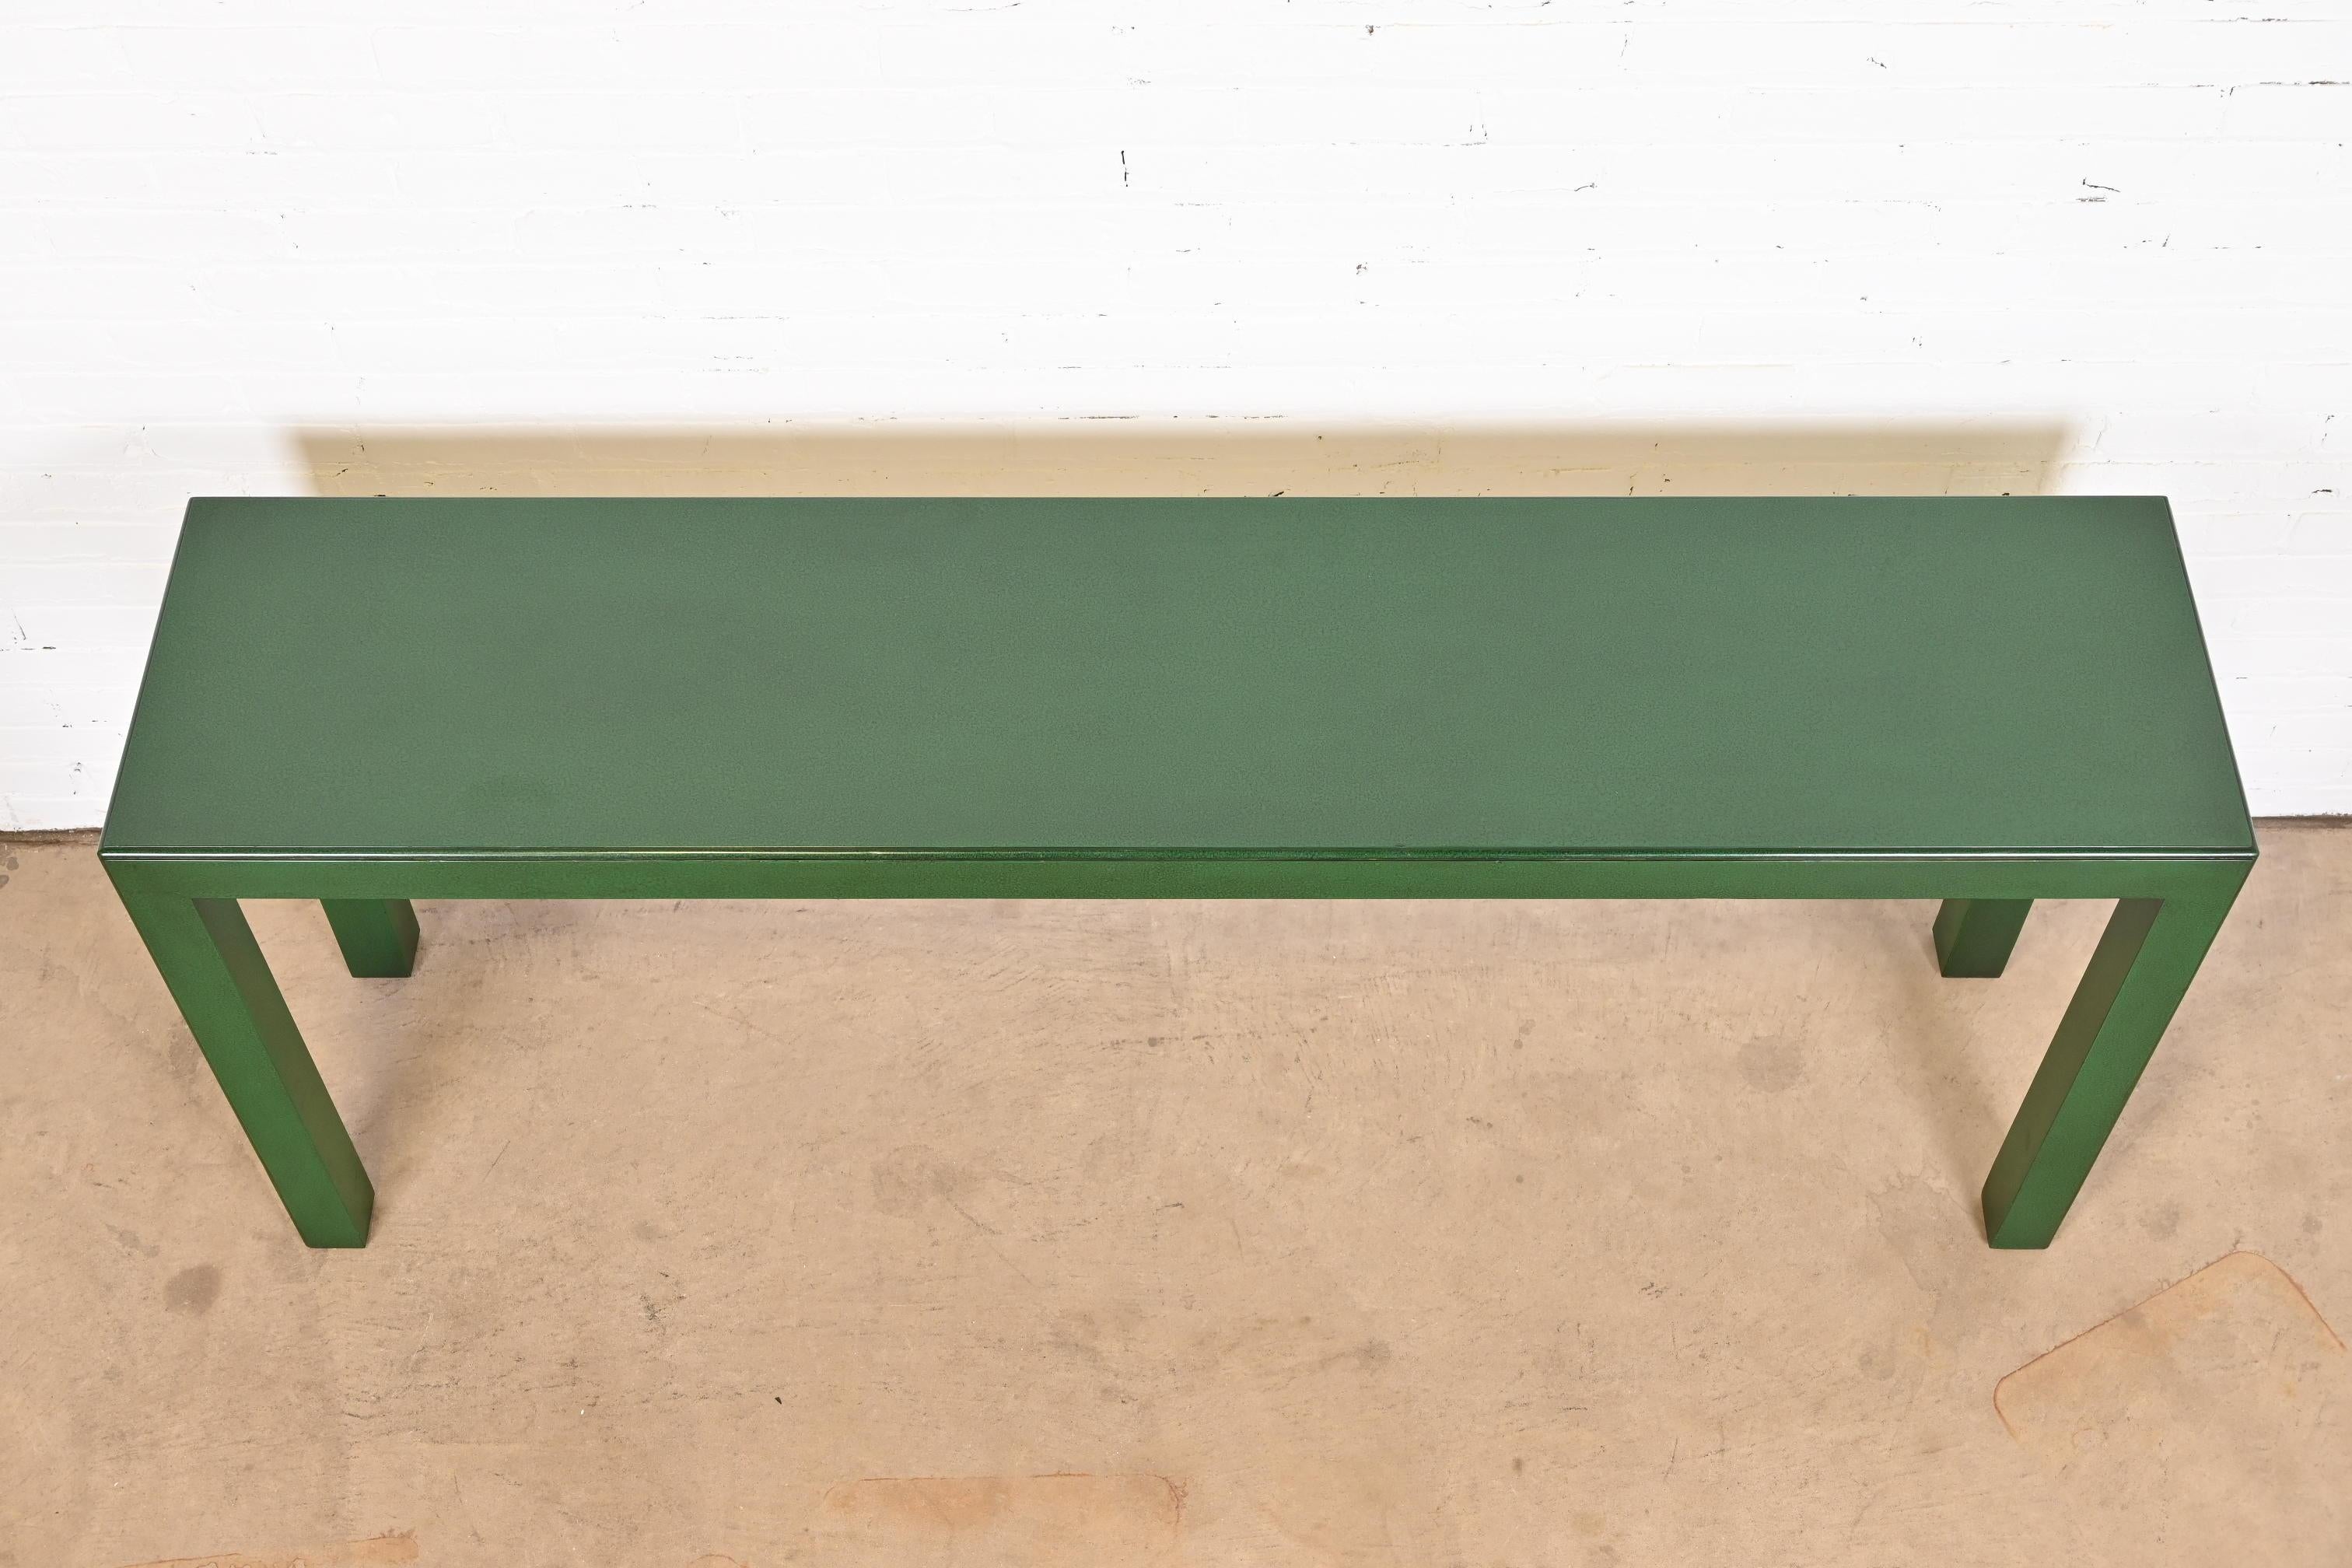 20th Century John Widdicomb Modern Green Lacquered Parsons Console Table